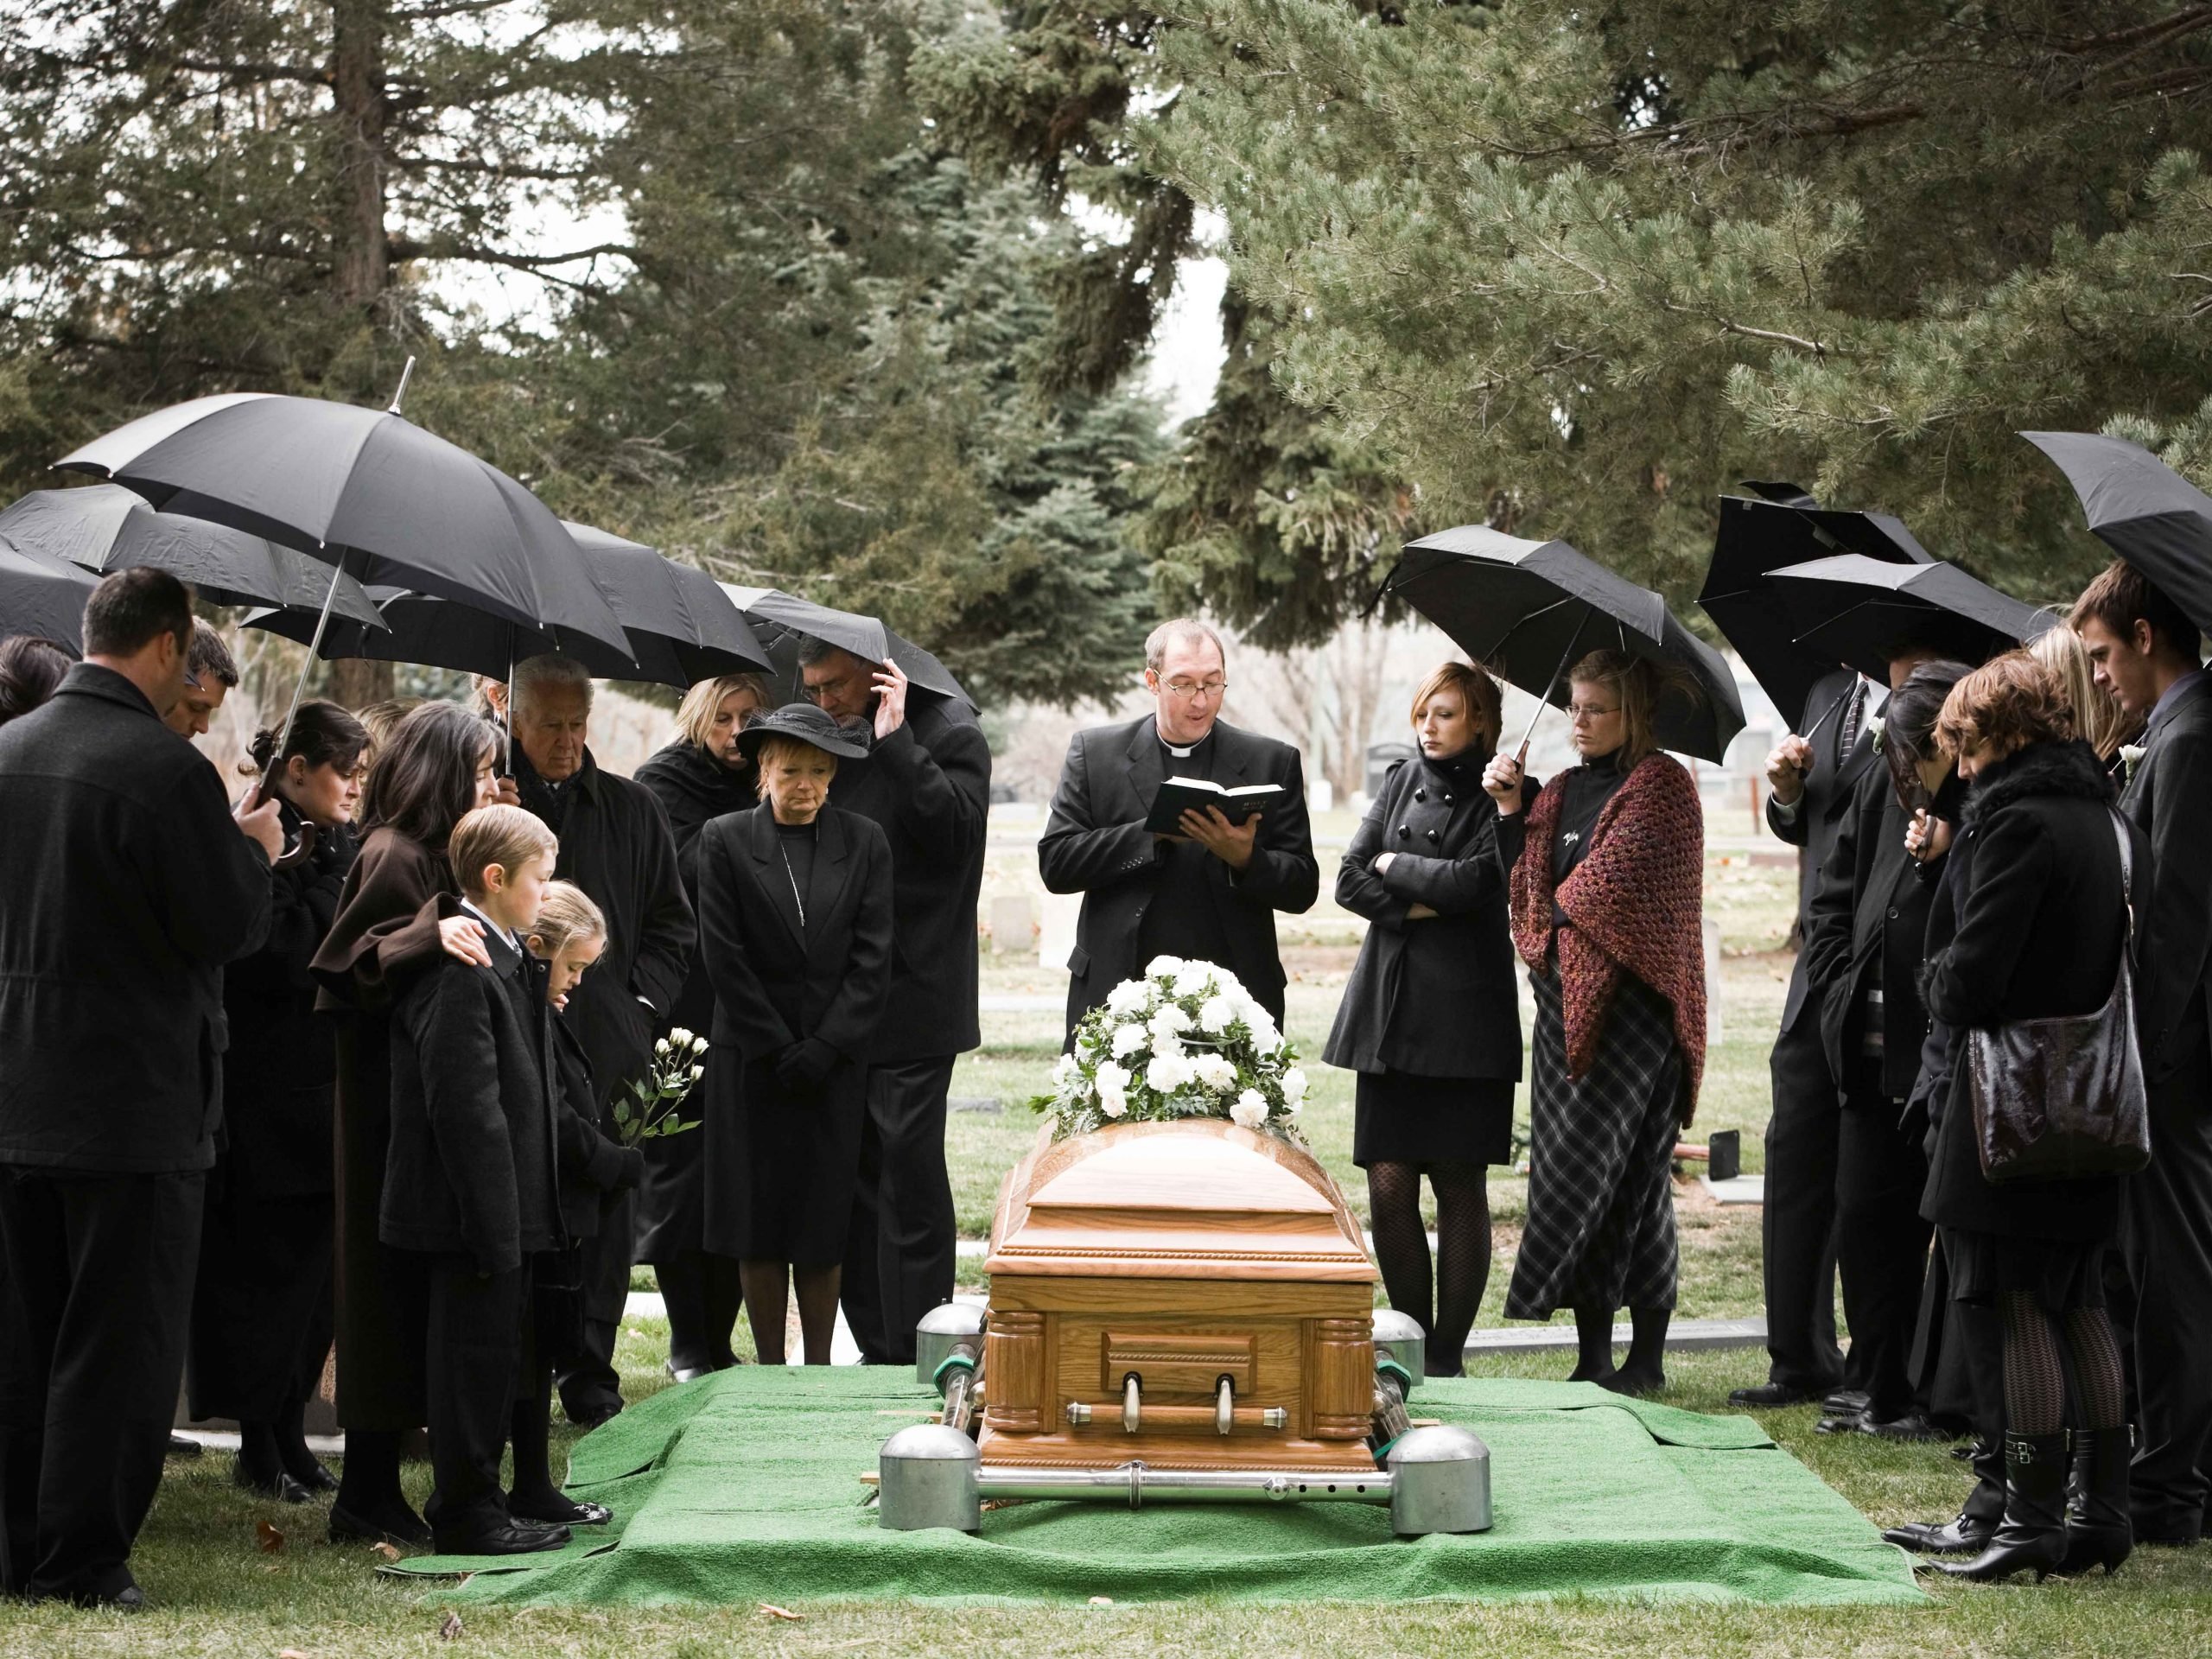 The funeral industry begins to bury tradition – The New Economy